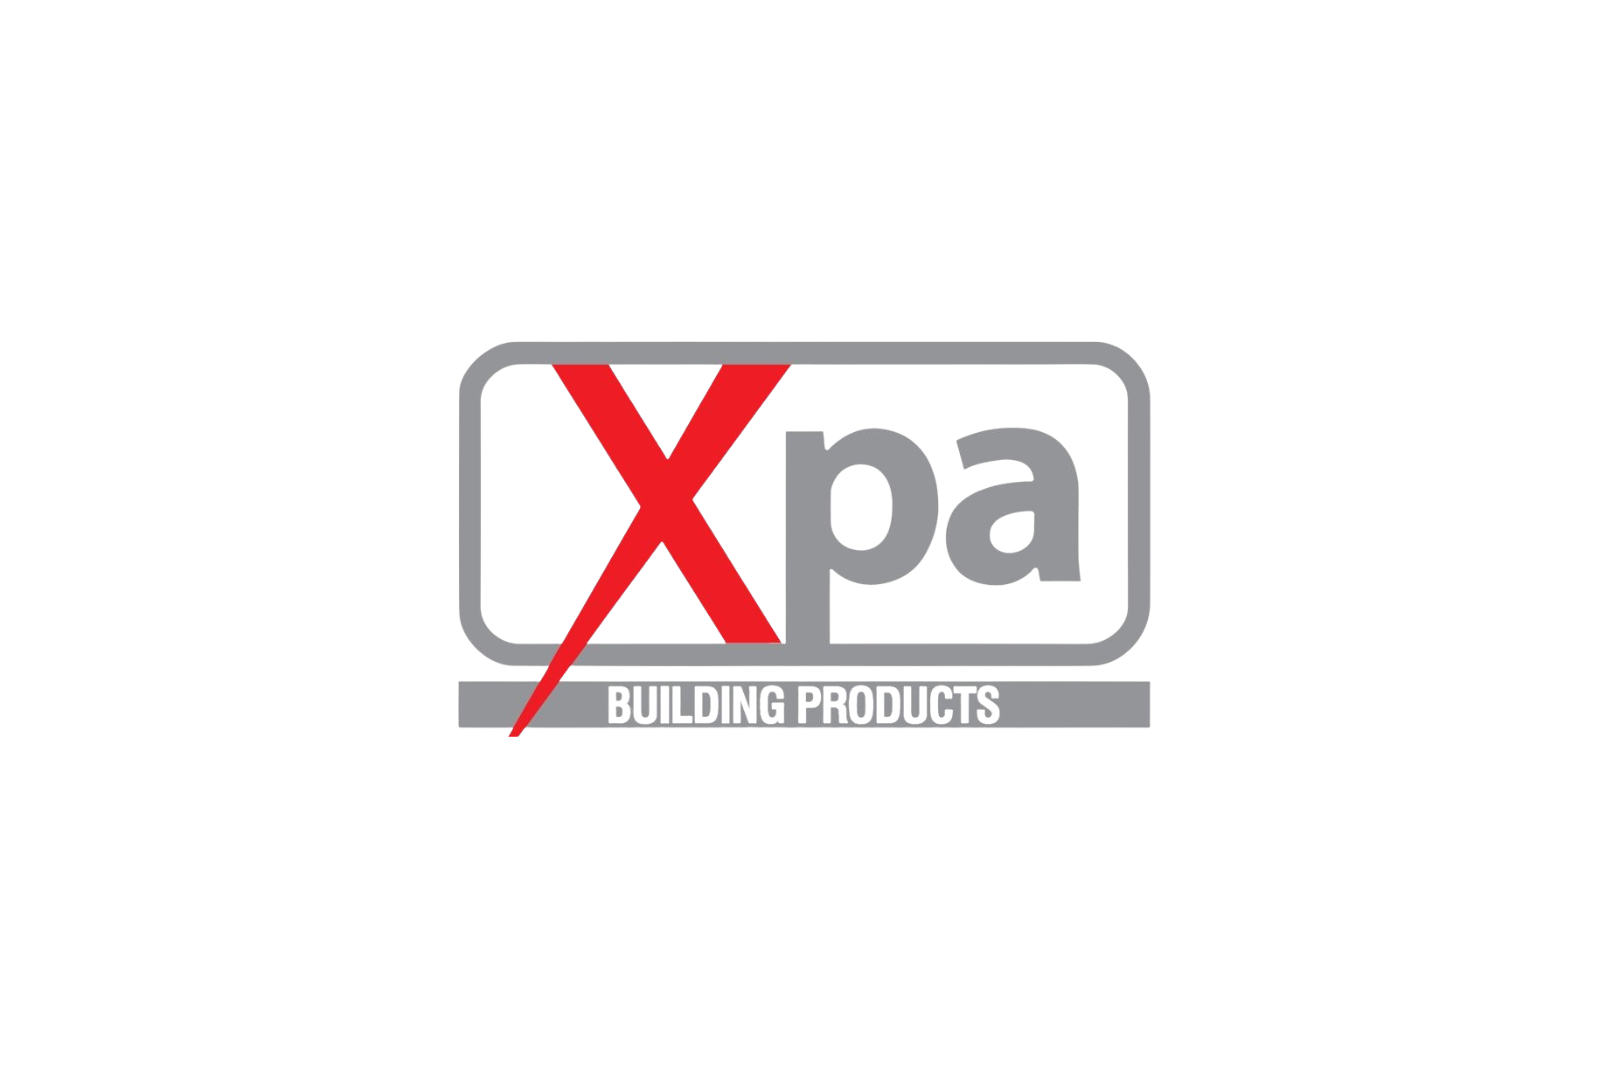 KNOW MORE ABOUT XPA